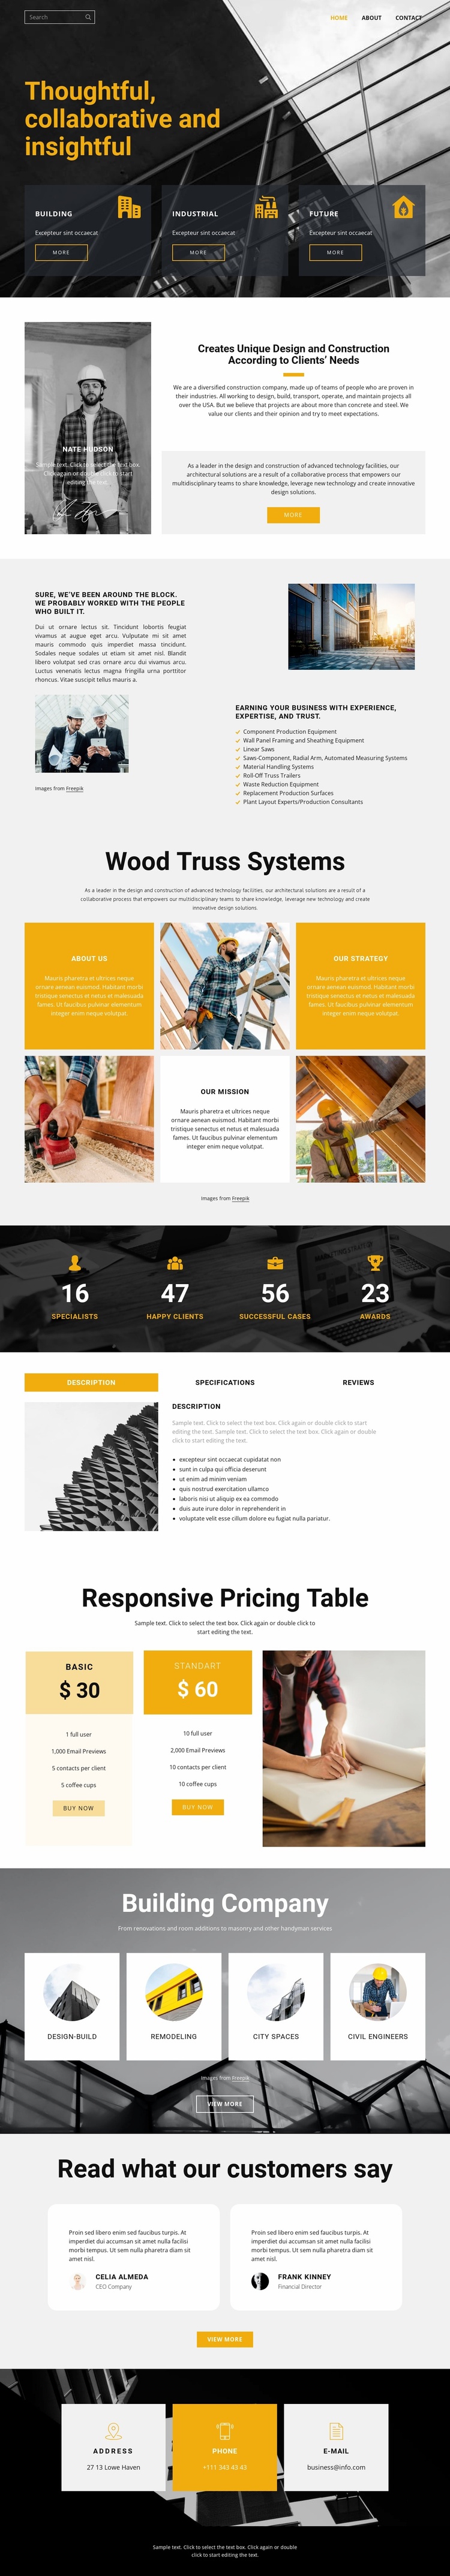 Thoughtful, collaborative and insightful Website Template